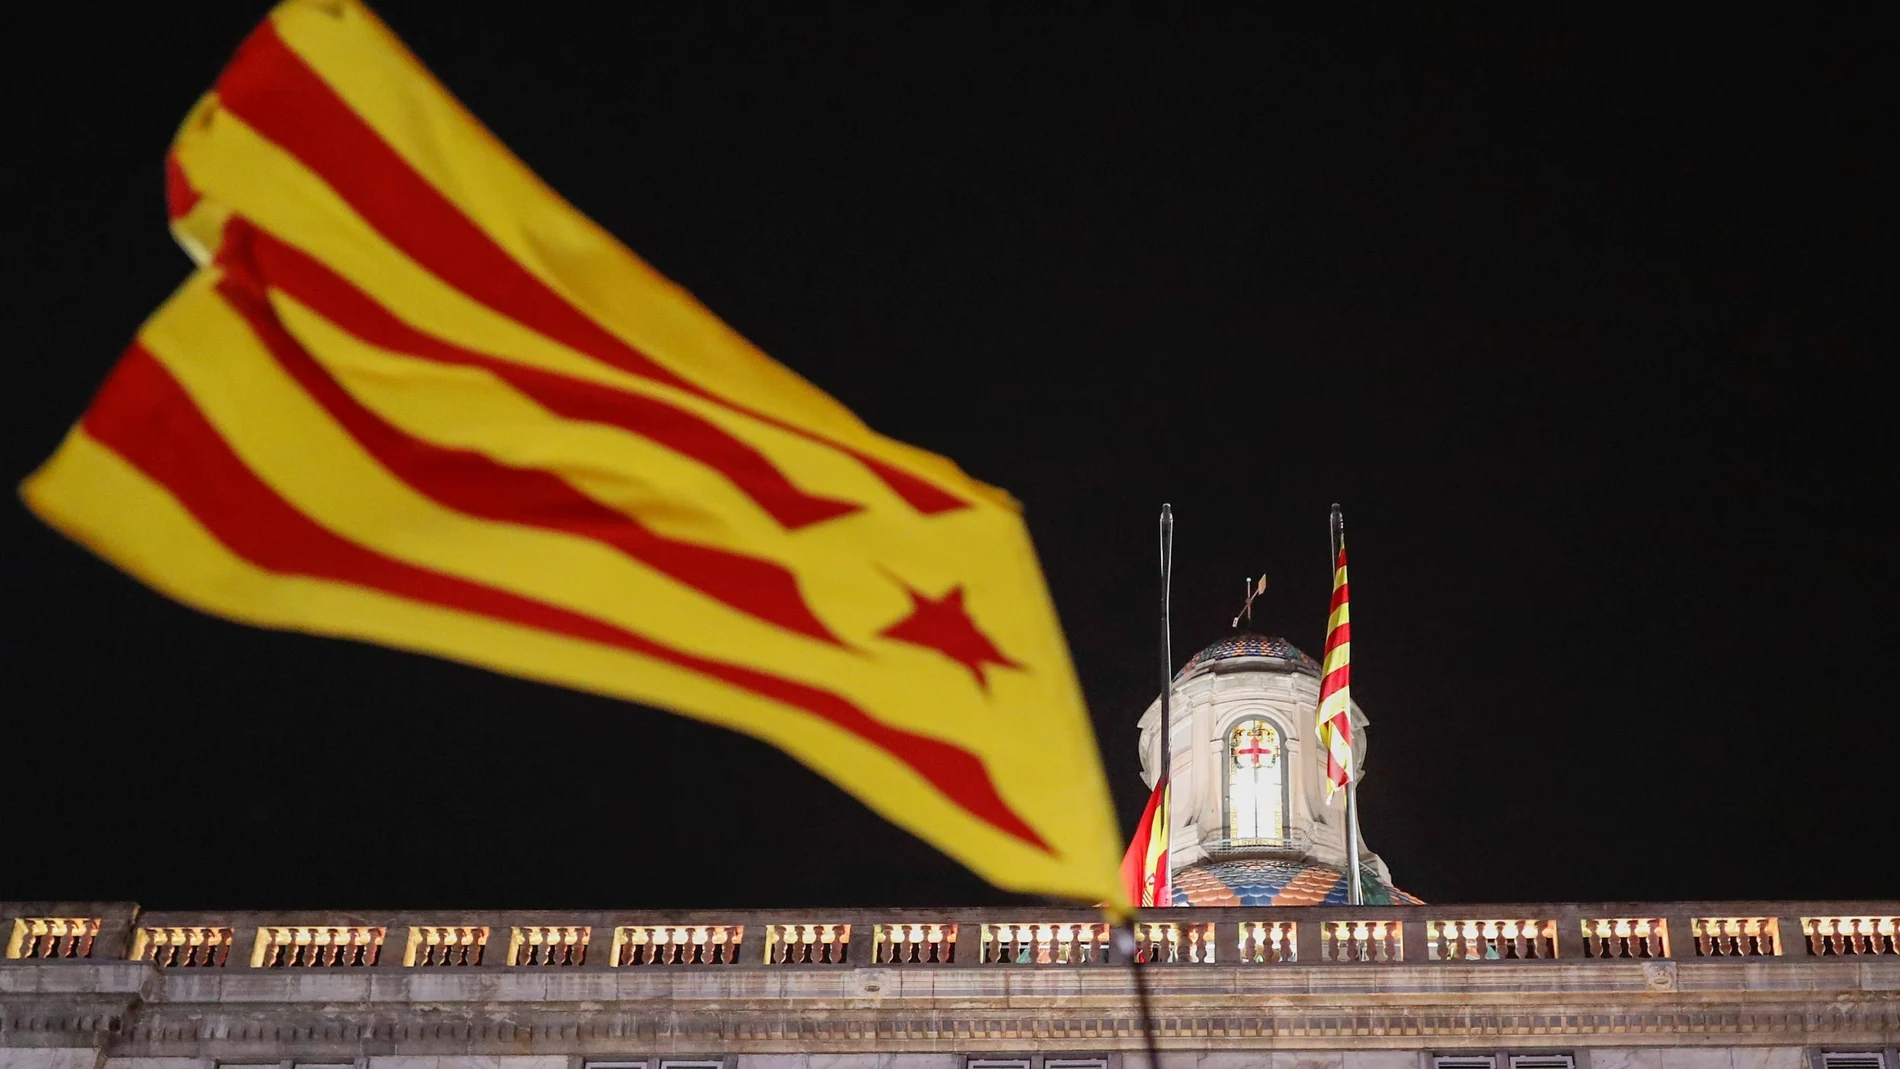 An Estelada (Catalan separatist flag) waves as a Spanish flag on top of the Palau de la Generalitat is lowered during a demonstration in support of Catalan leader Quim Torra, in Barcelona, Spain January 3, 2020. REUTERS/Nacho Doce